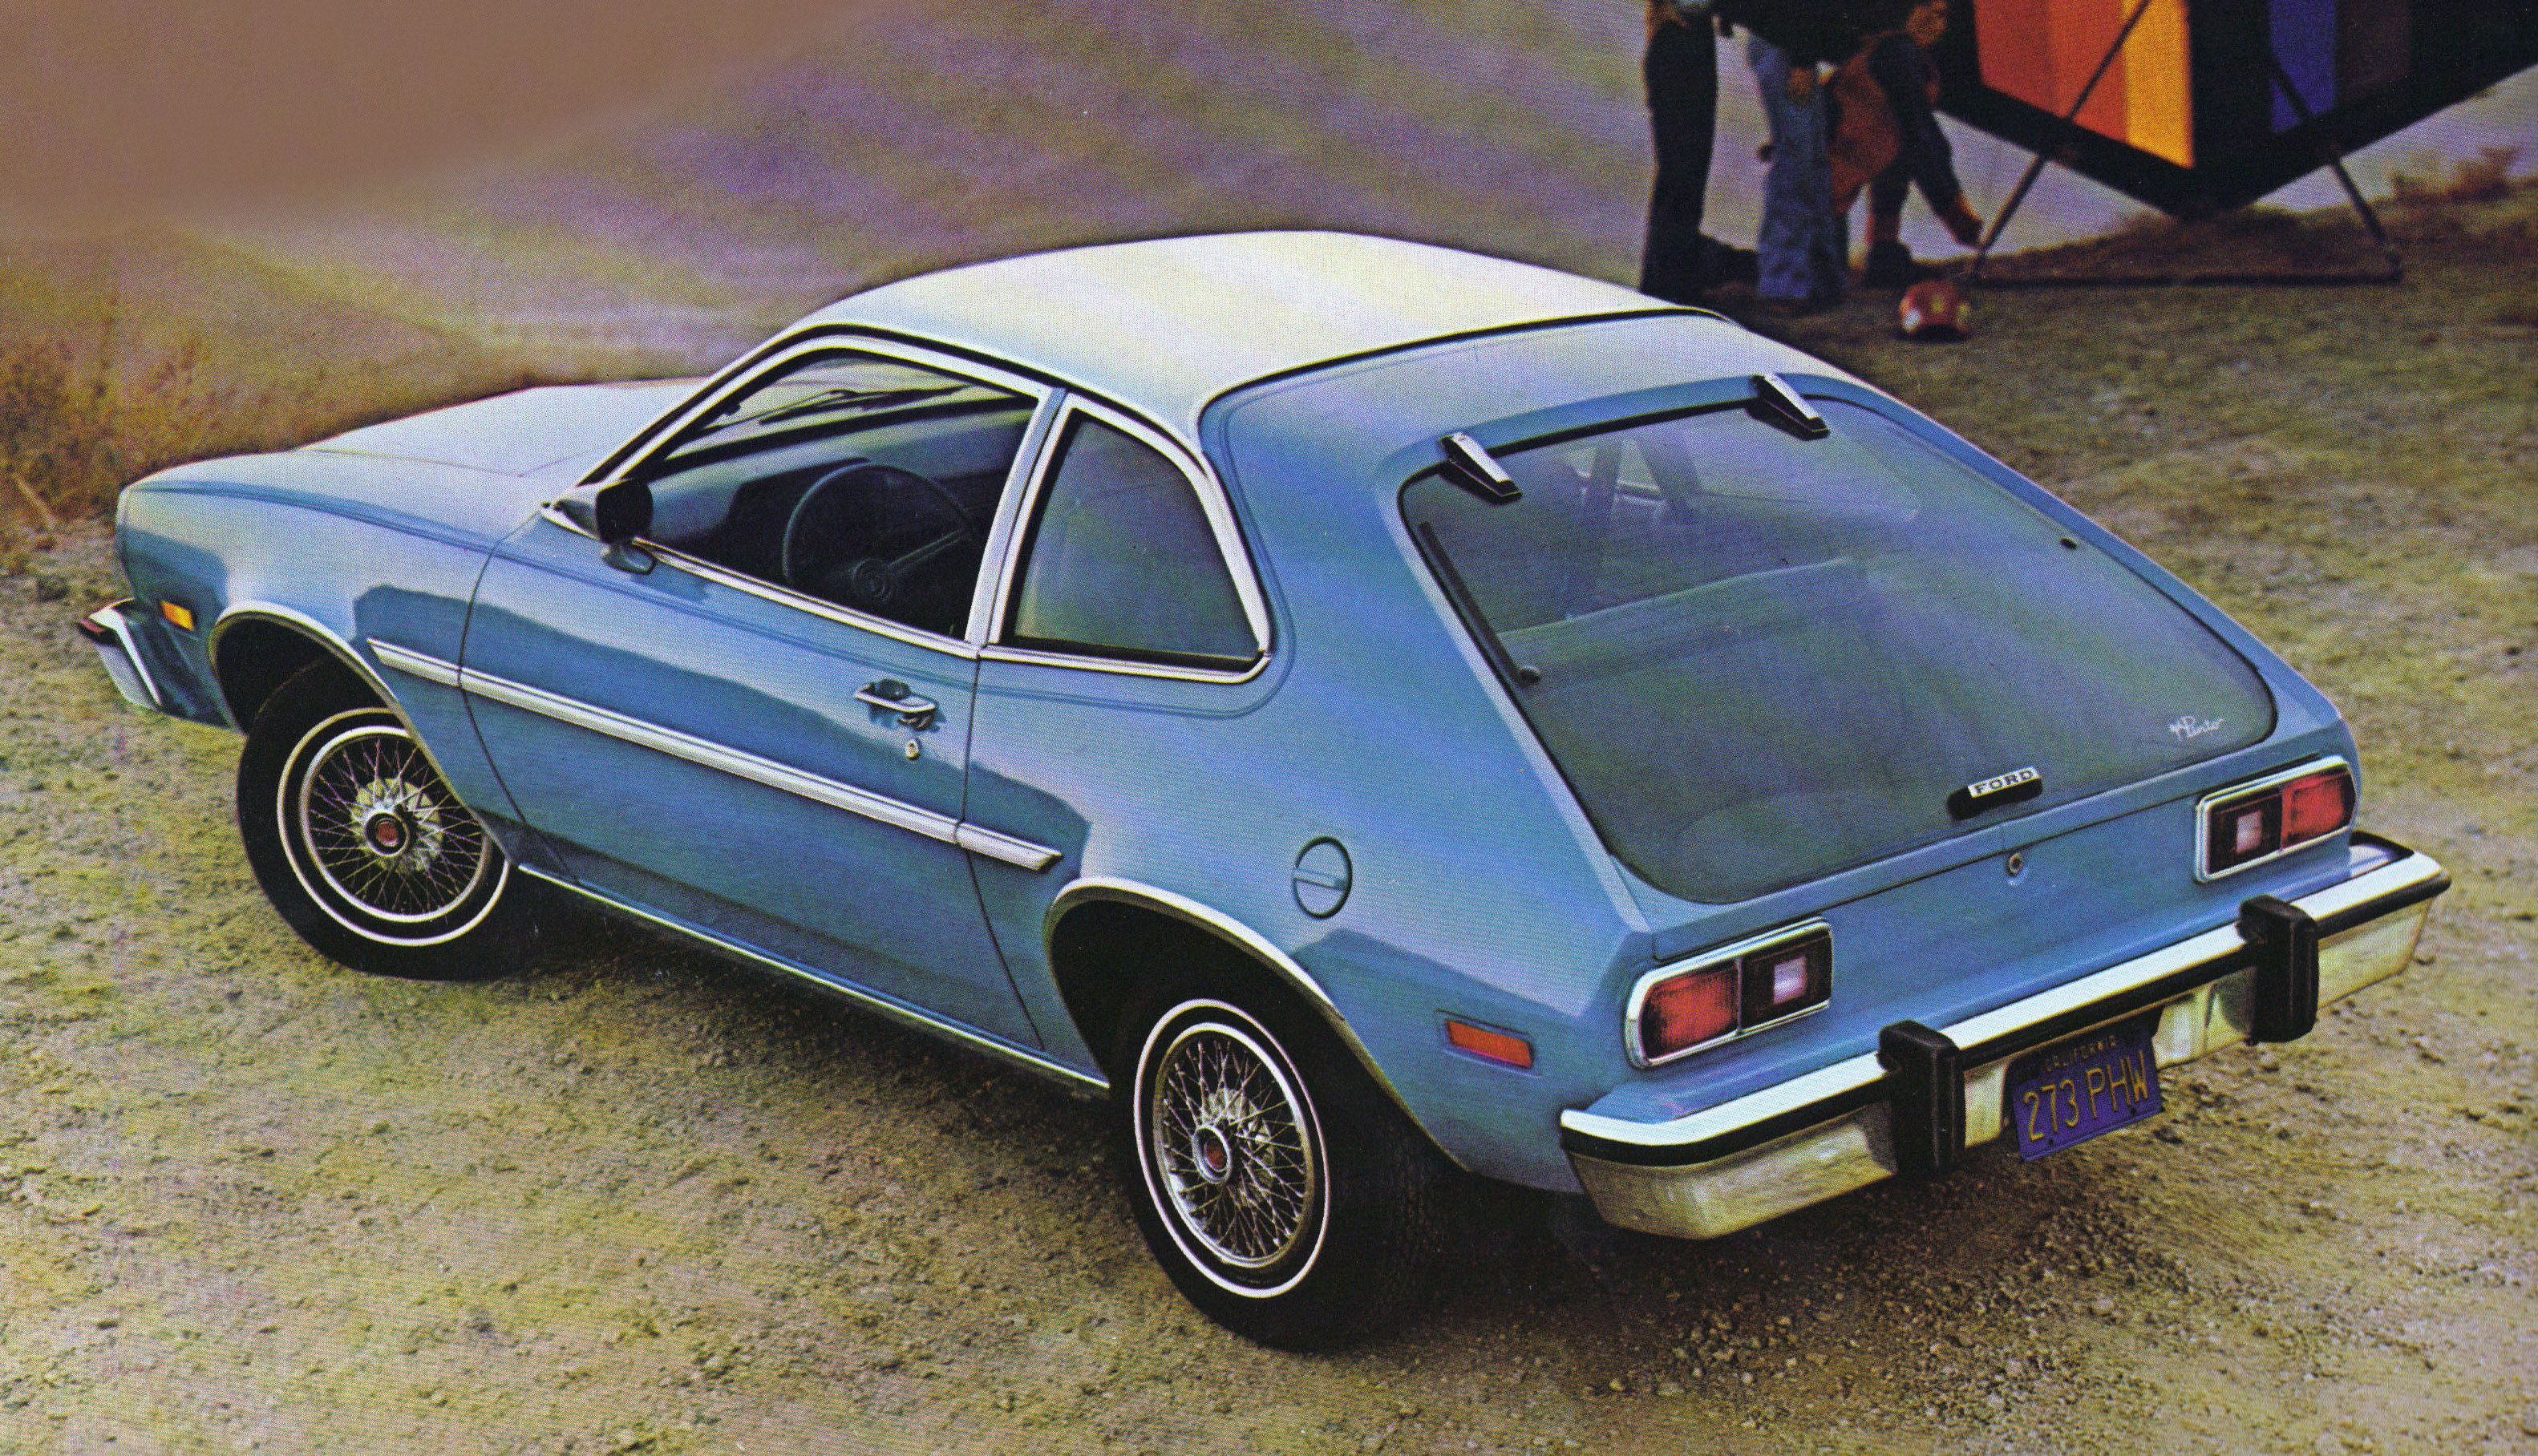 A blue Ford Pinto parked on dirt